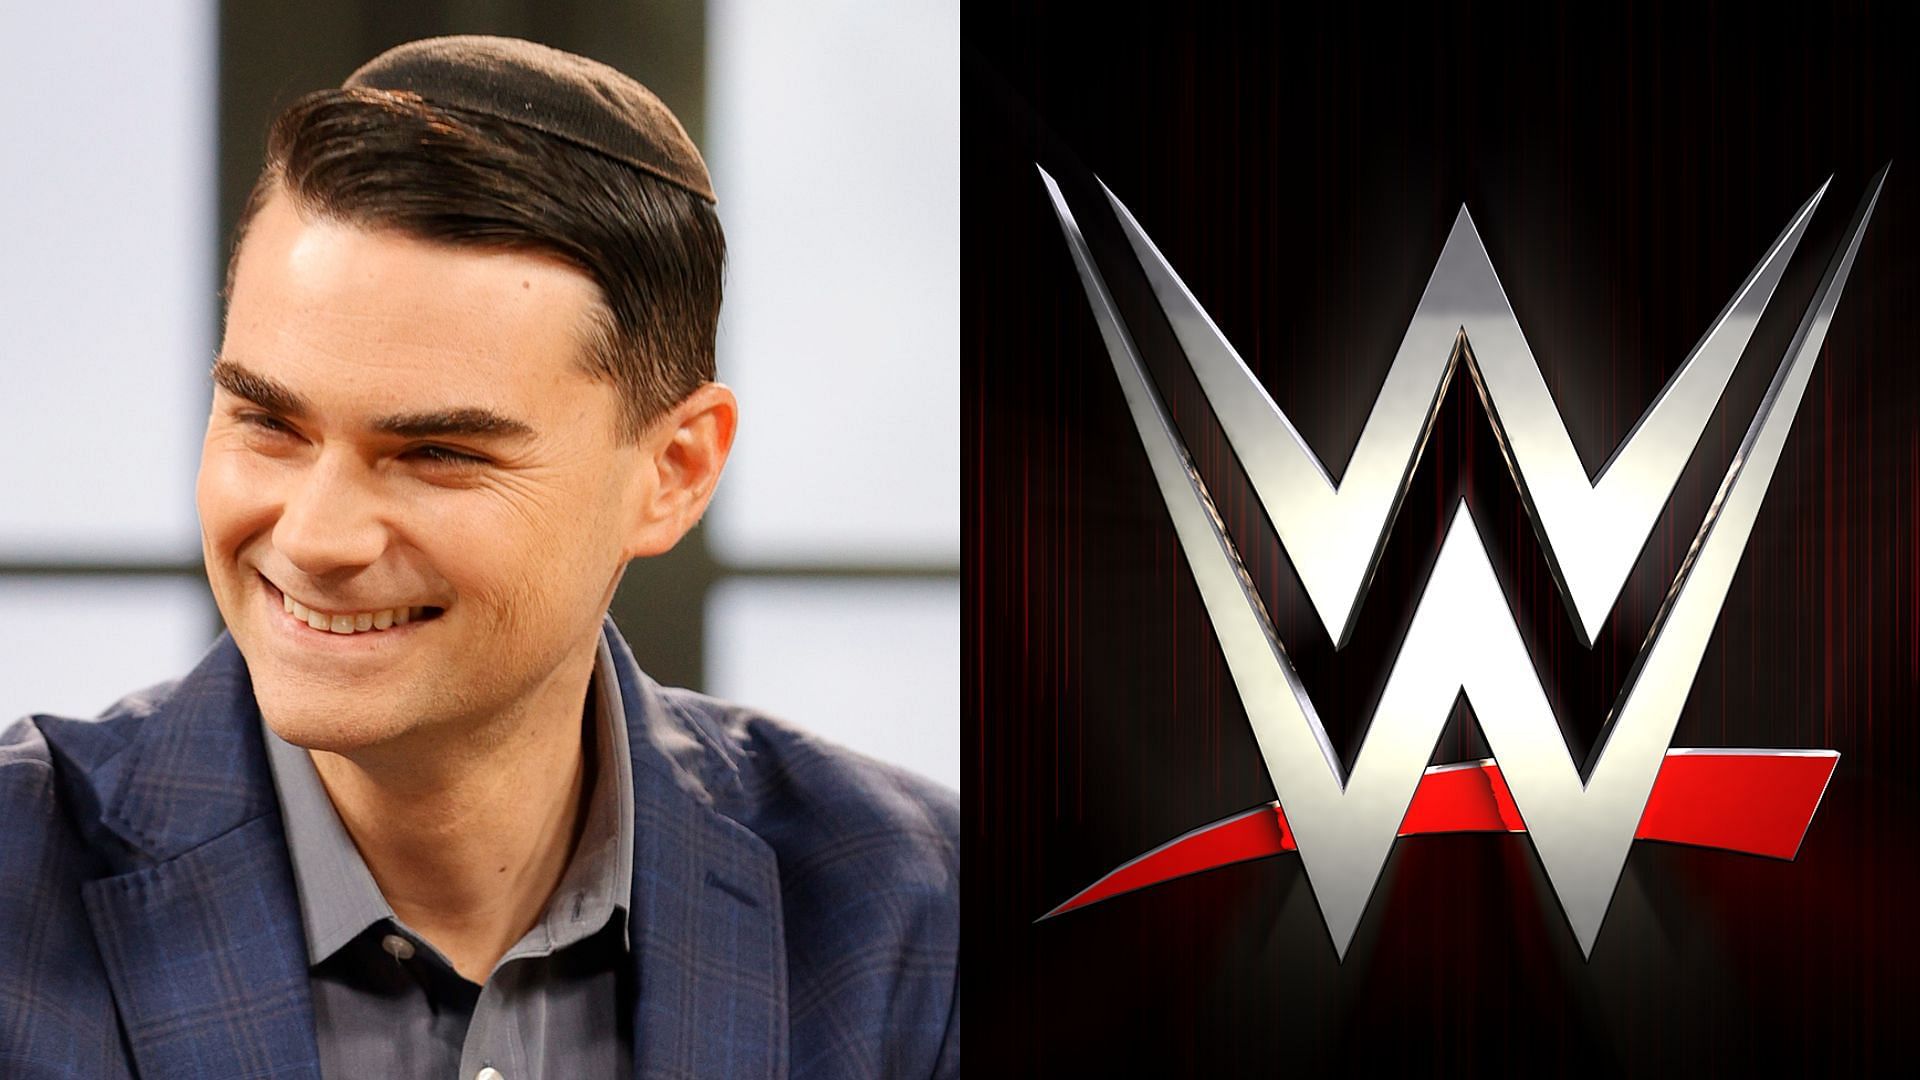 Ben Shapiro was proposed to face a WWE legend by an actor from Better Call Saul series